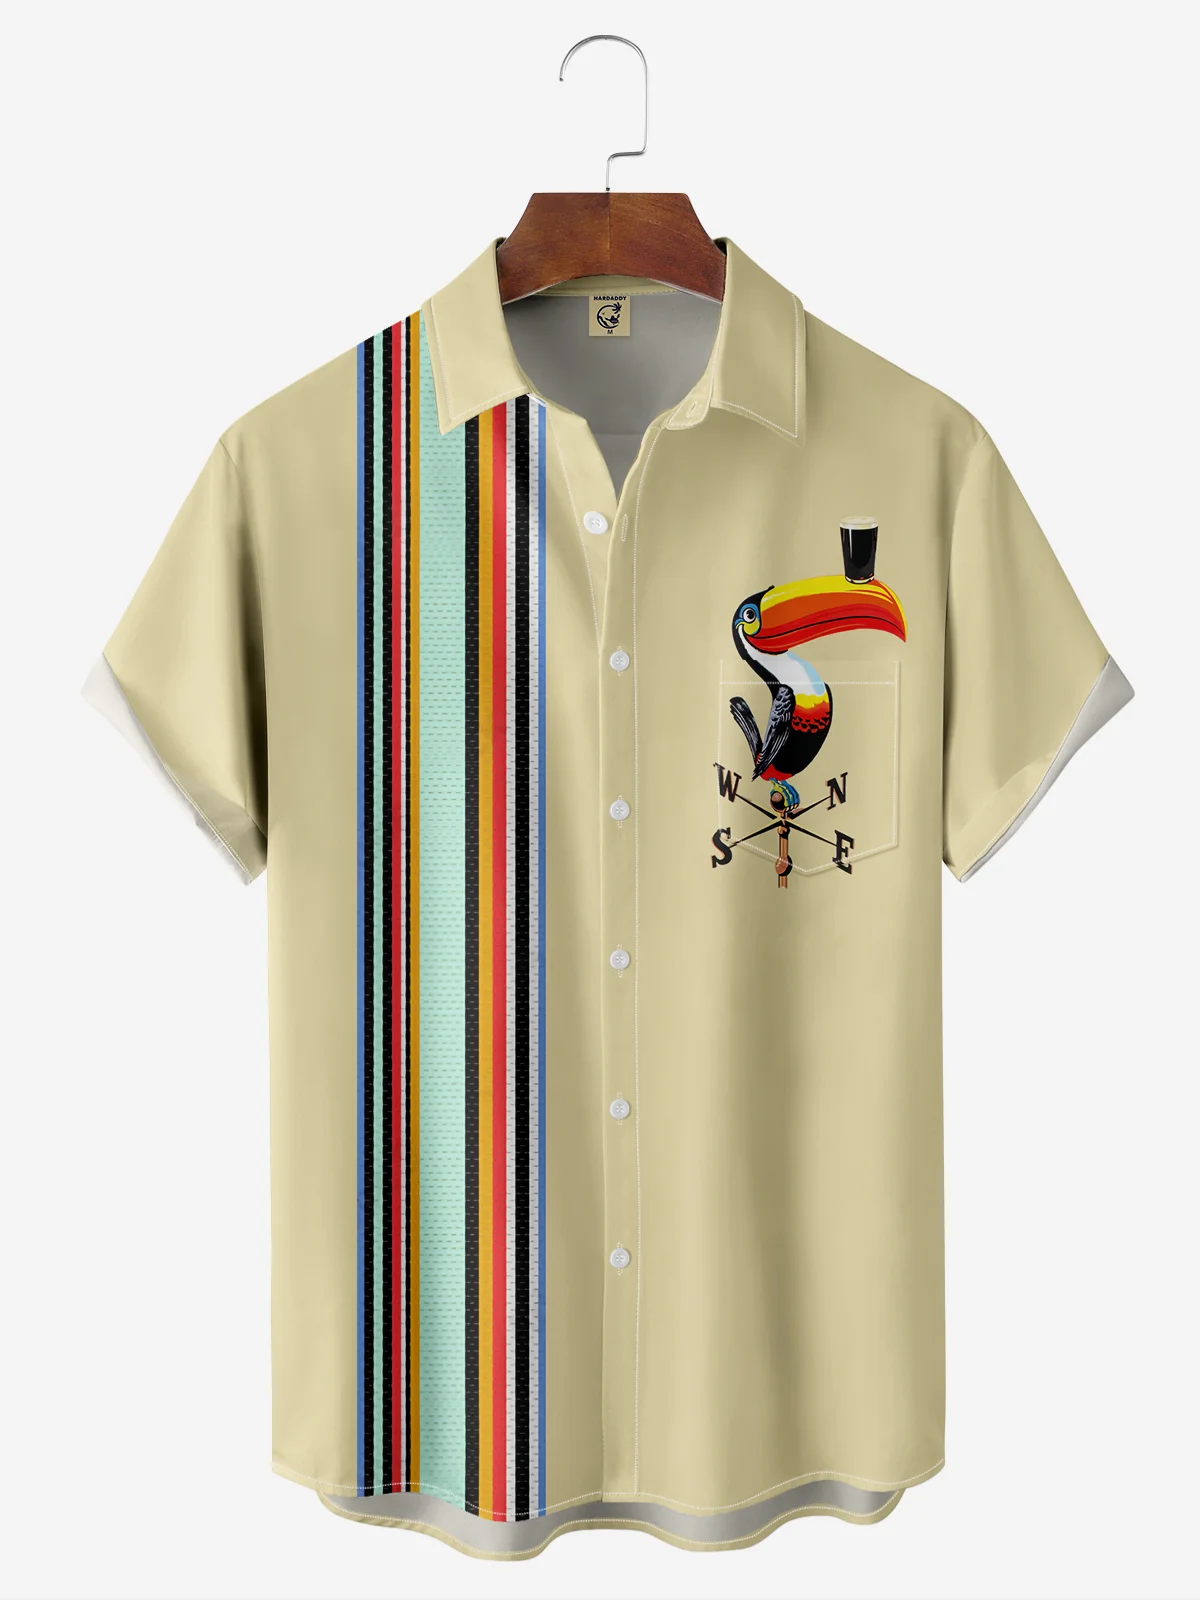 Hardaddy Moisture-Wicking Breathable Toucan Chest Pocket Bowling Shirt